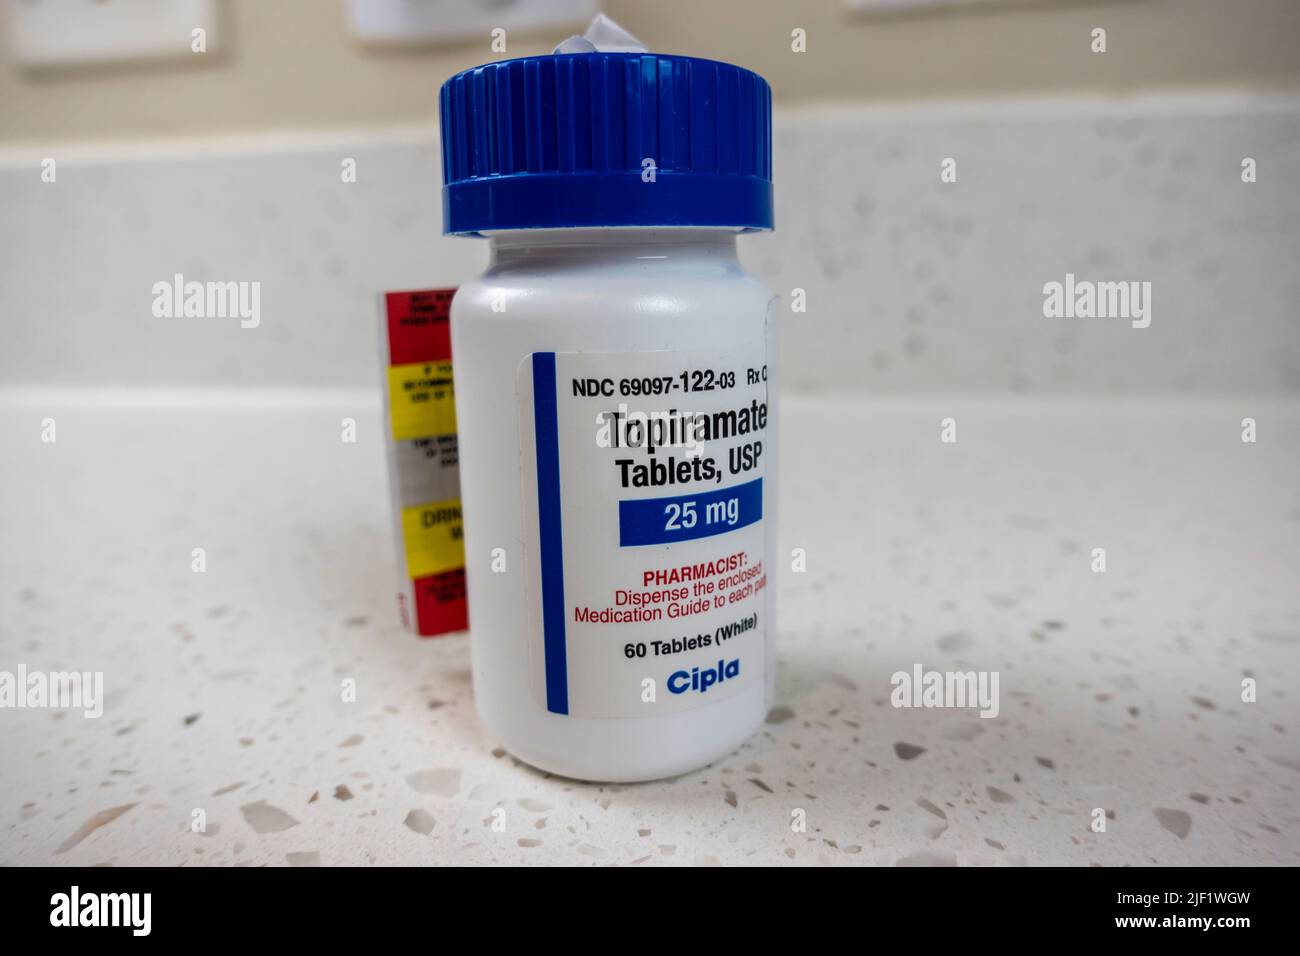 Seattle, WA USA - circa May 2022: Angled view of a bottle of Topiramate medication on a white counter top. Stock Photo